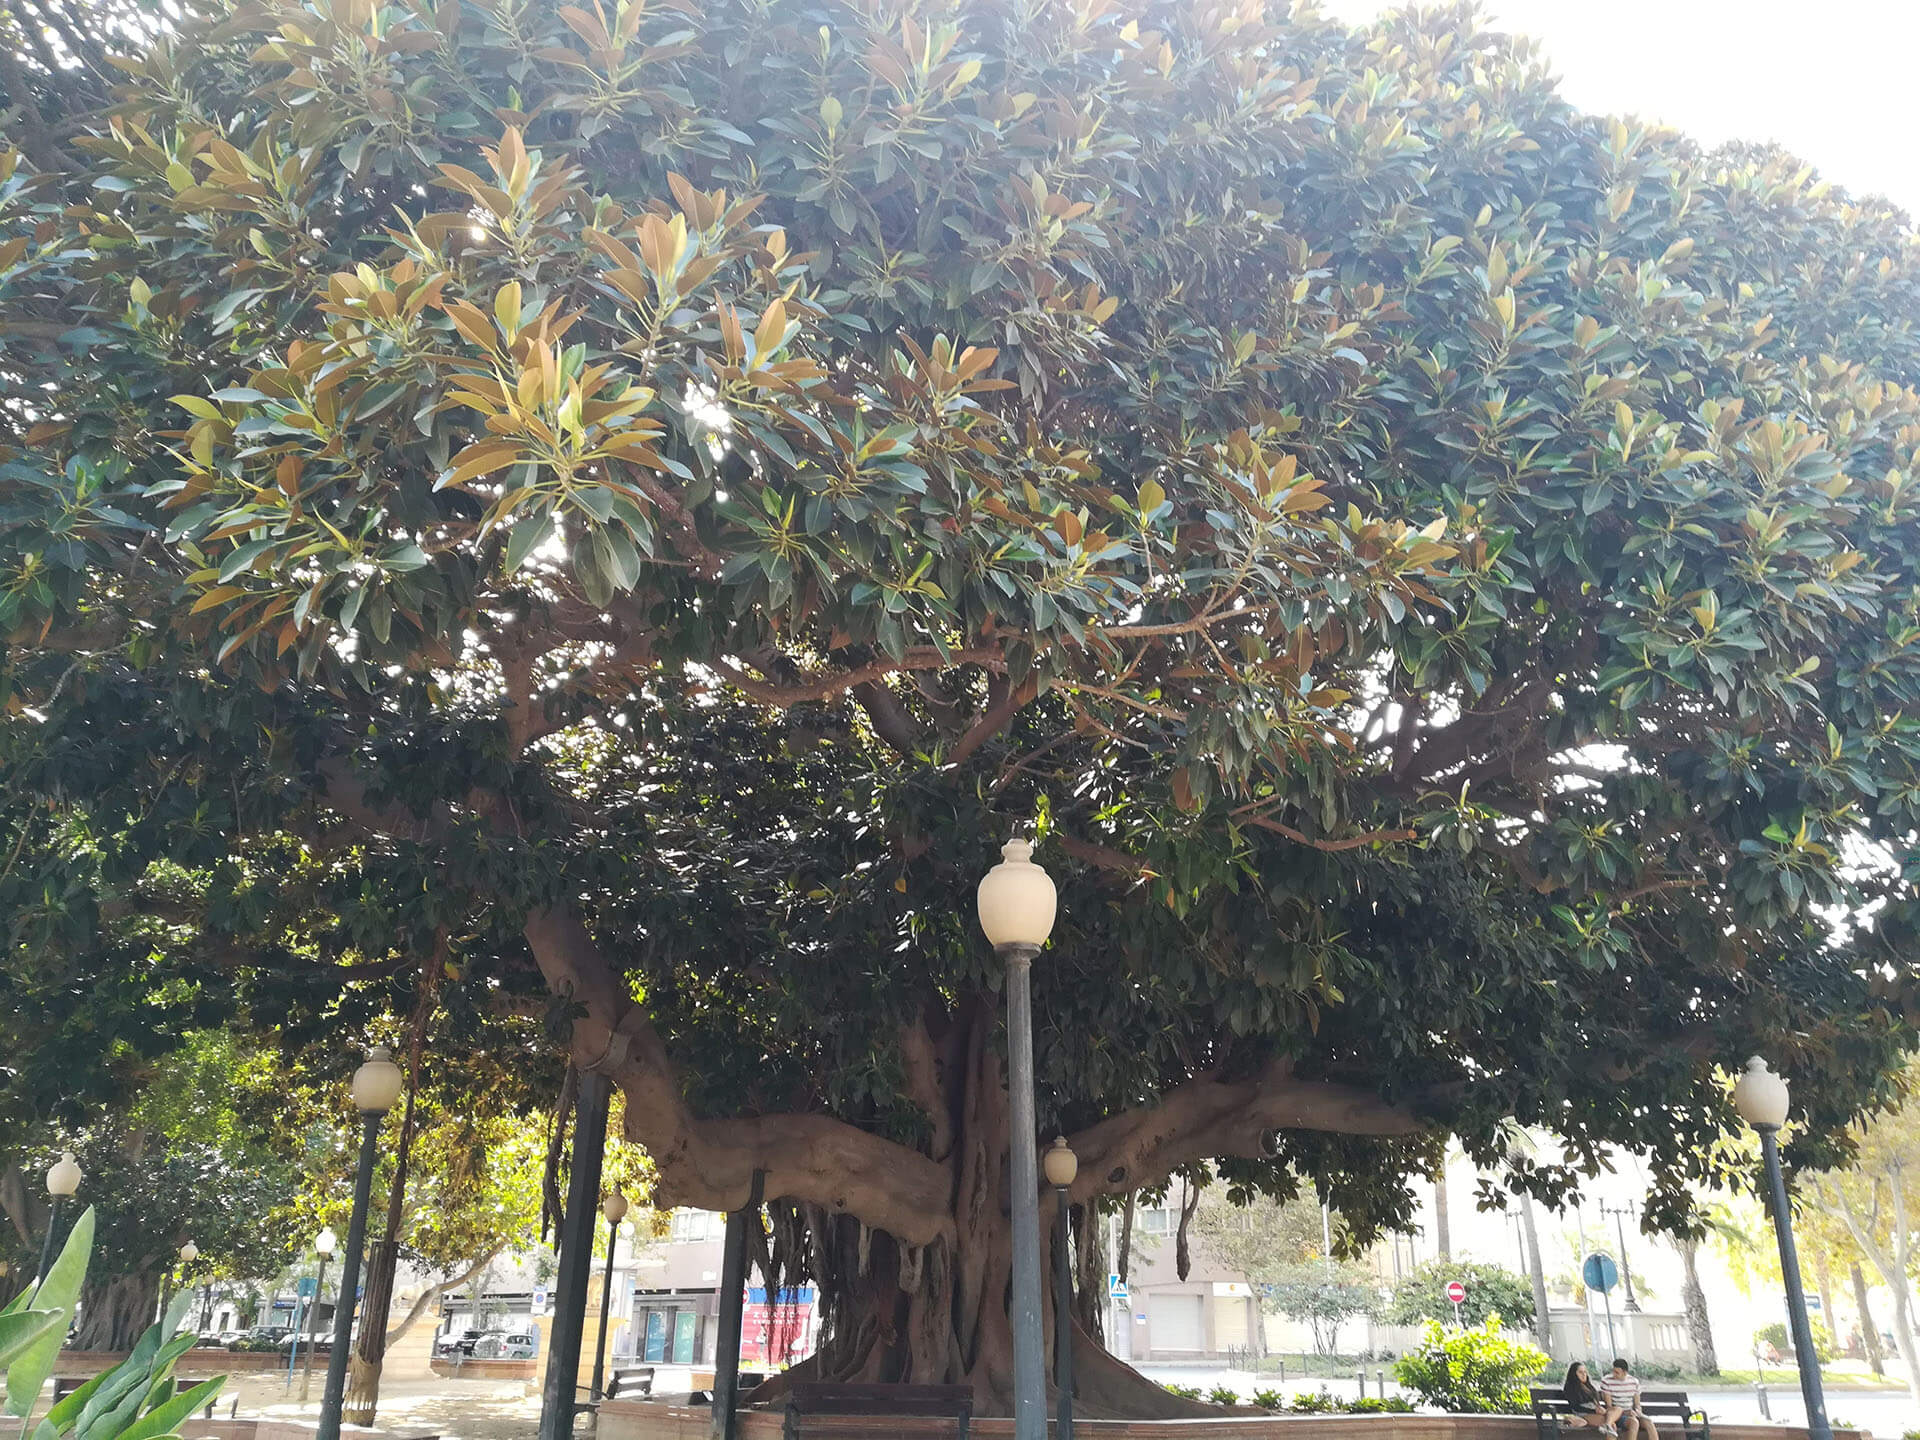  Huge old trees in the park in Alicante